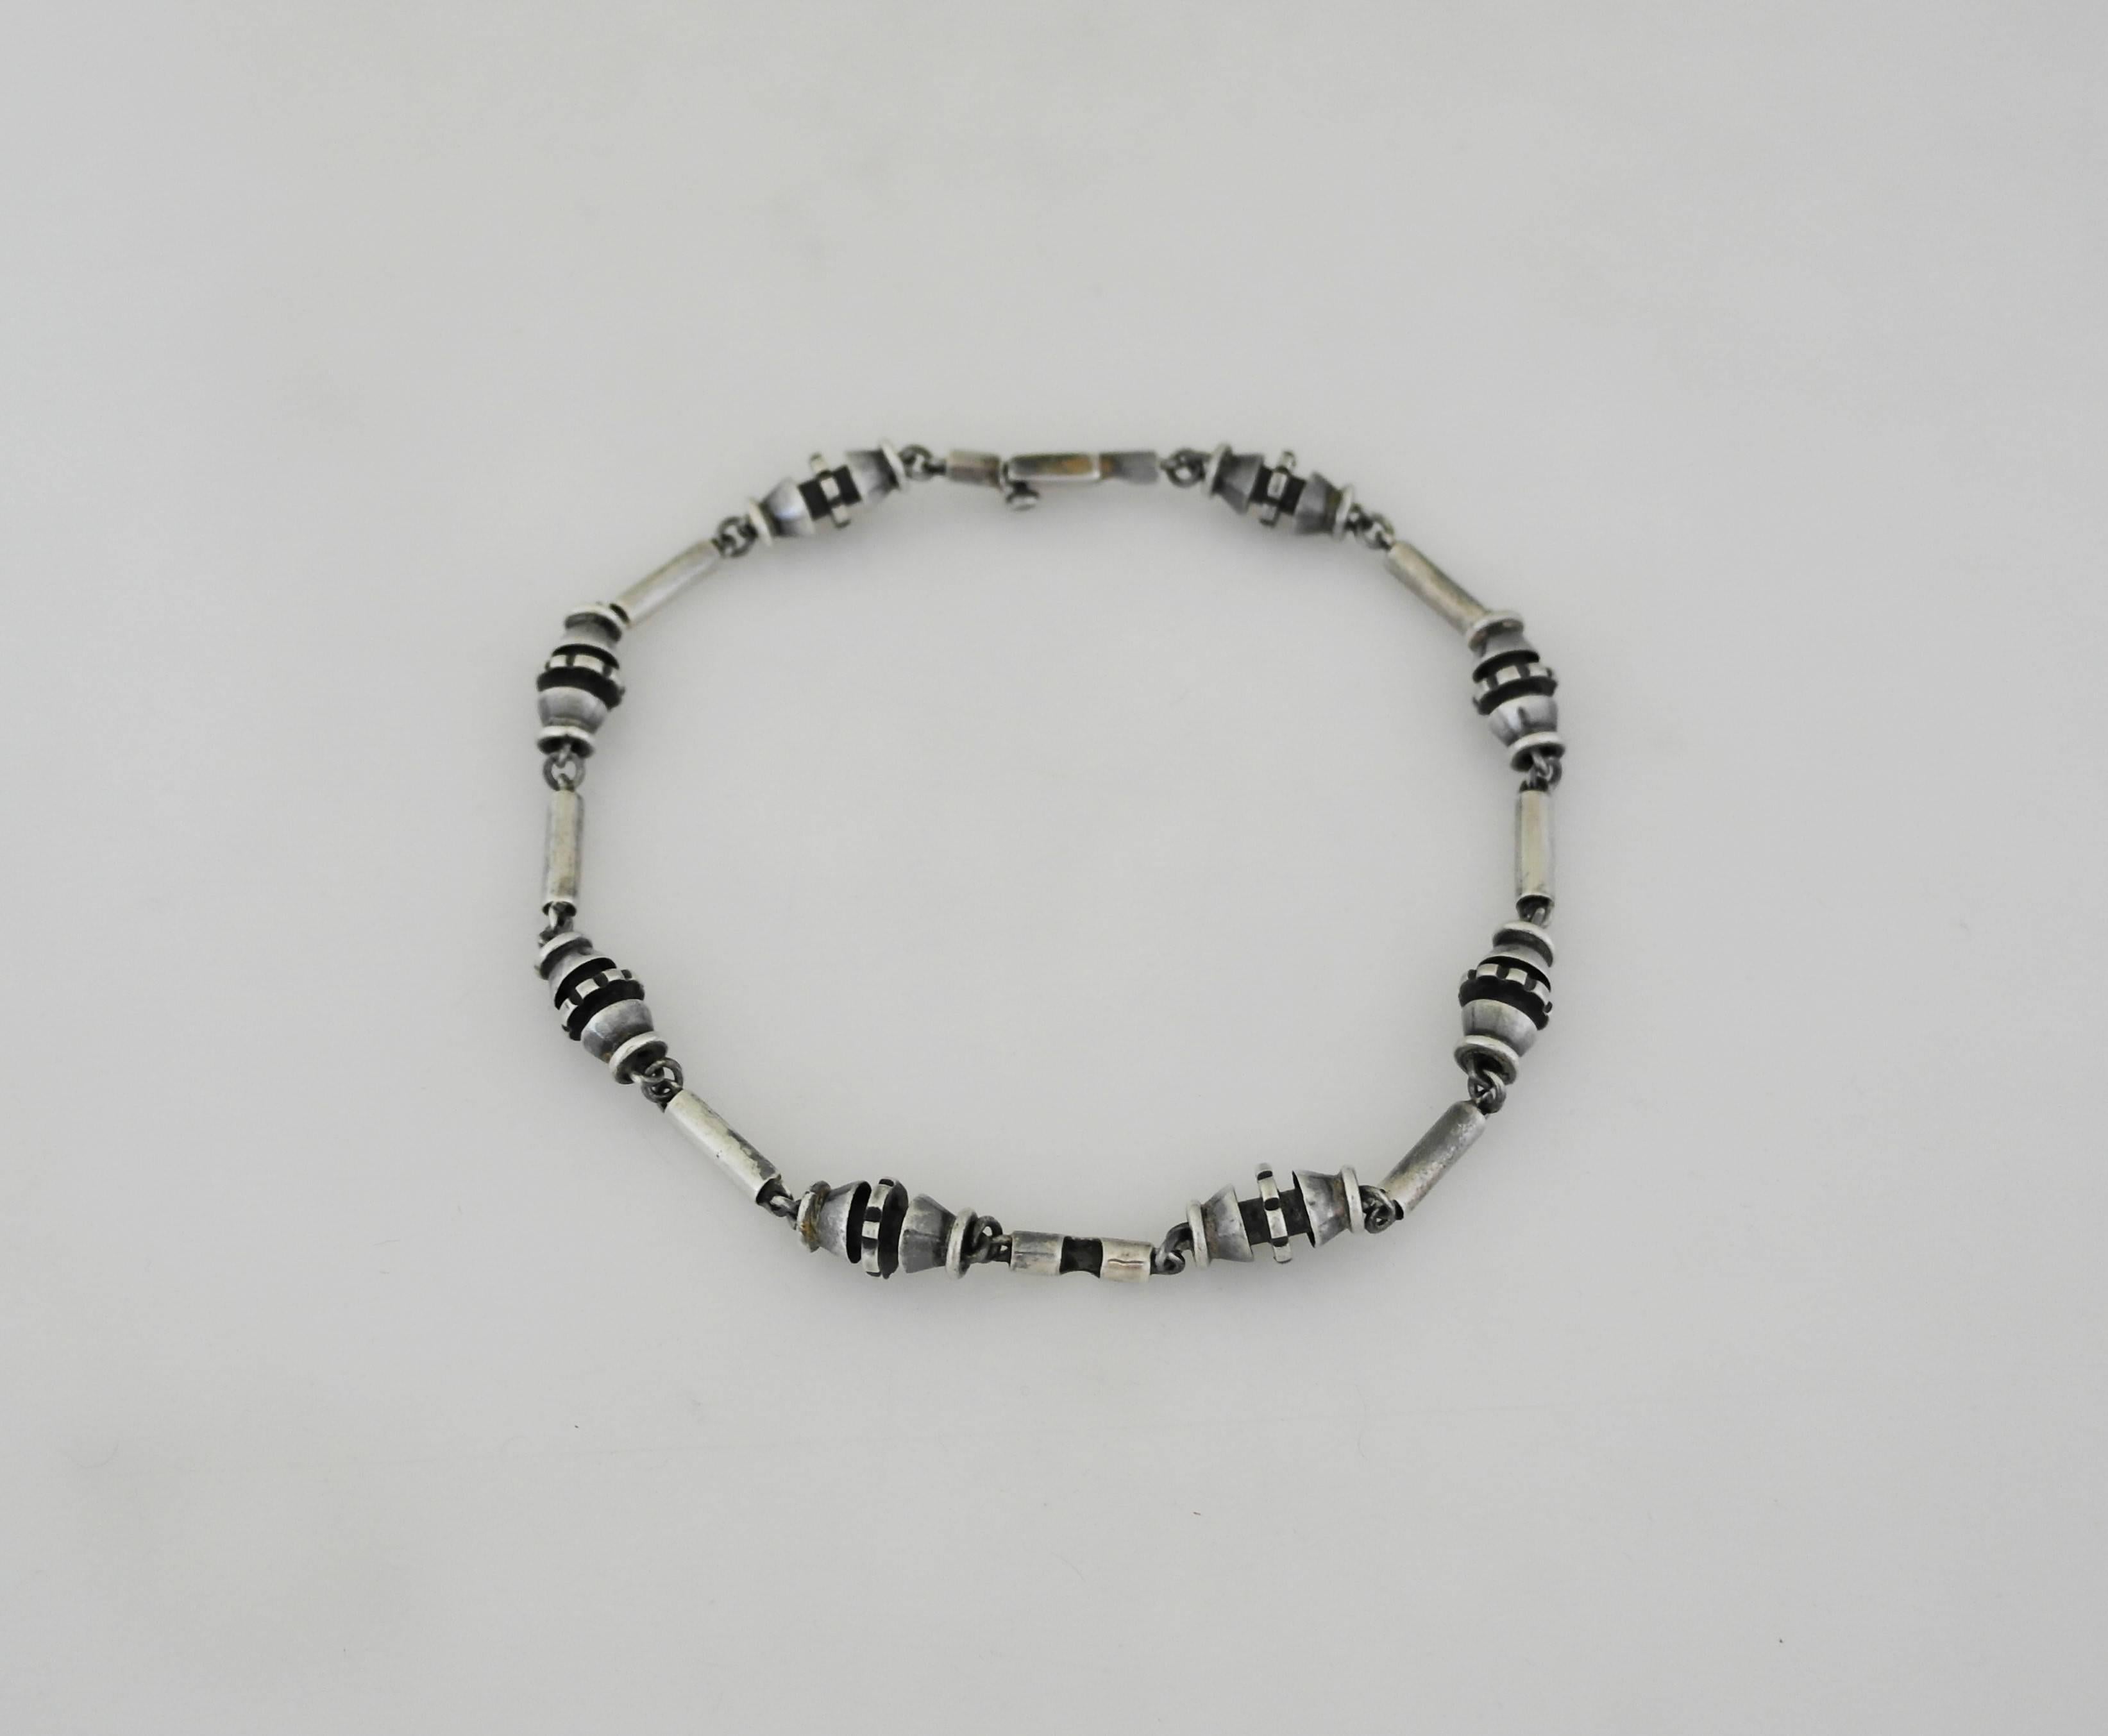 Being offered is a sterling silver choker necklace by Salvador Teran of Taxco, Mexico. Necklace comprising turned modernist links attached to a tongue & box closure. Dimensions: 14 inches (wearable). Marked as illustrated. In excellent condition.